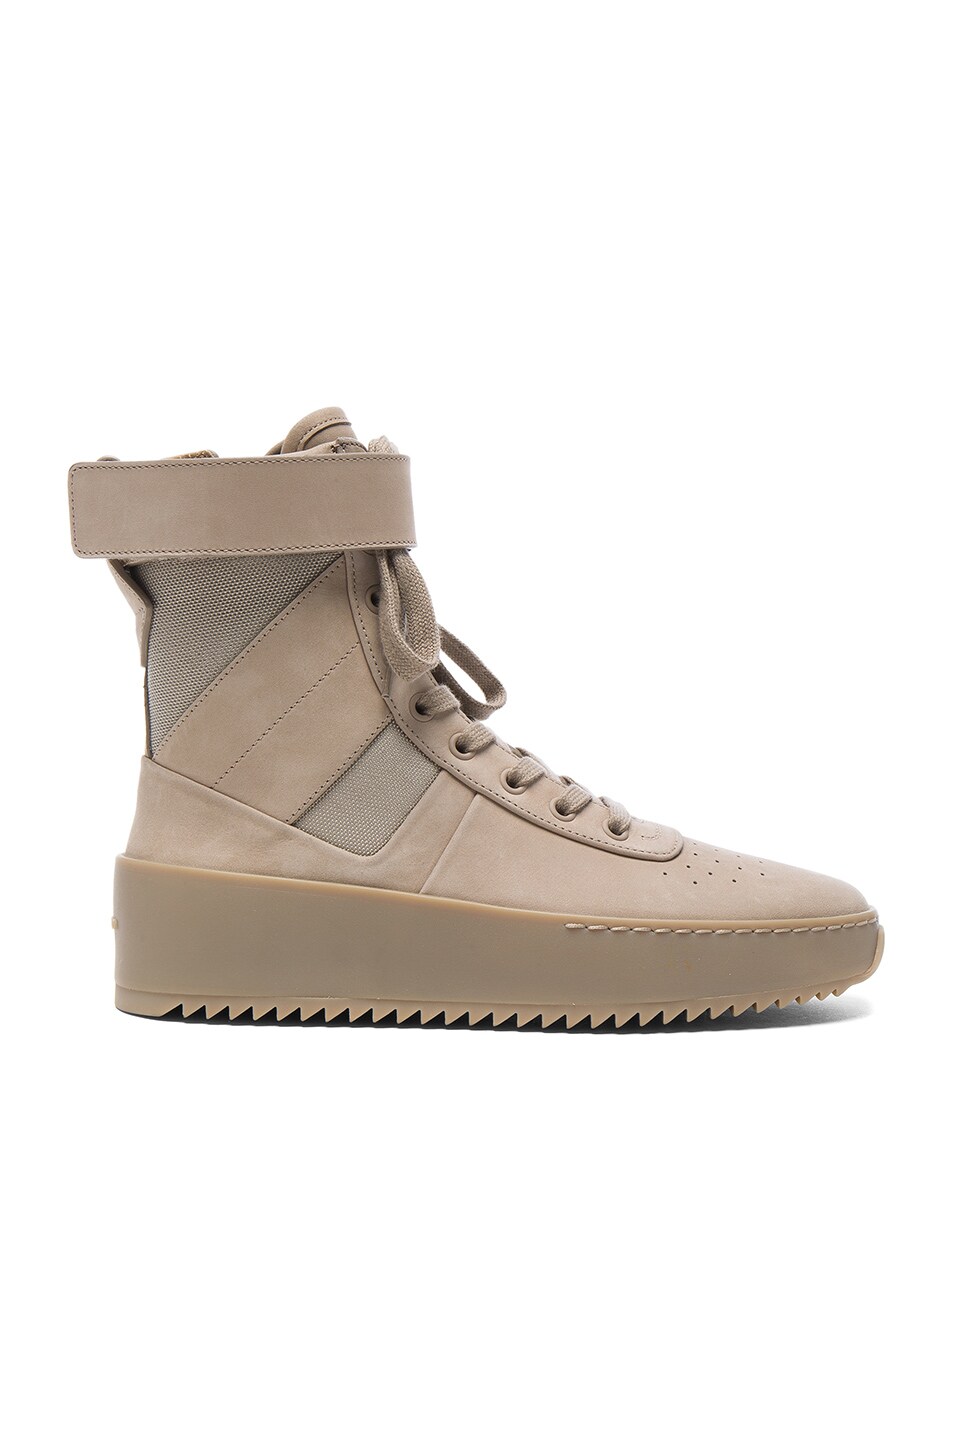 Image 1 of Fear of God Nubuck Leather Military Sneakers in Desert Beige